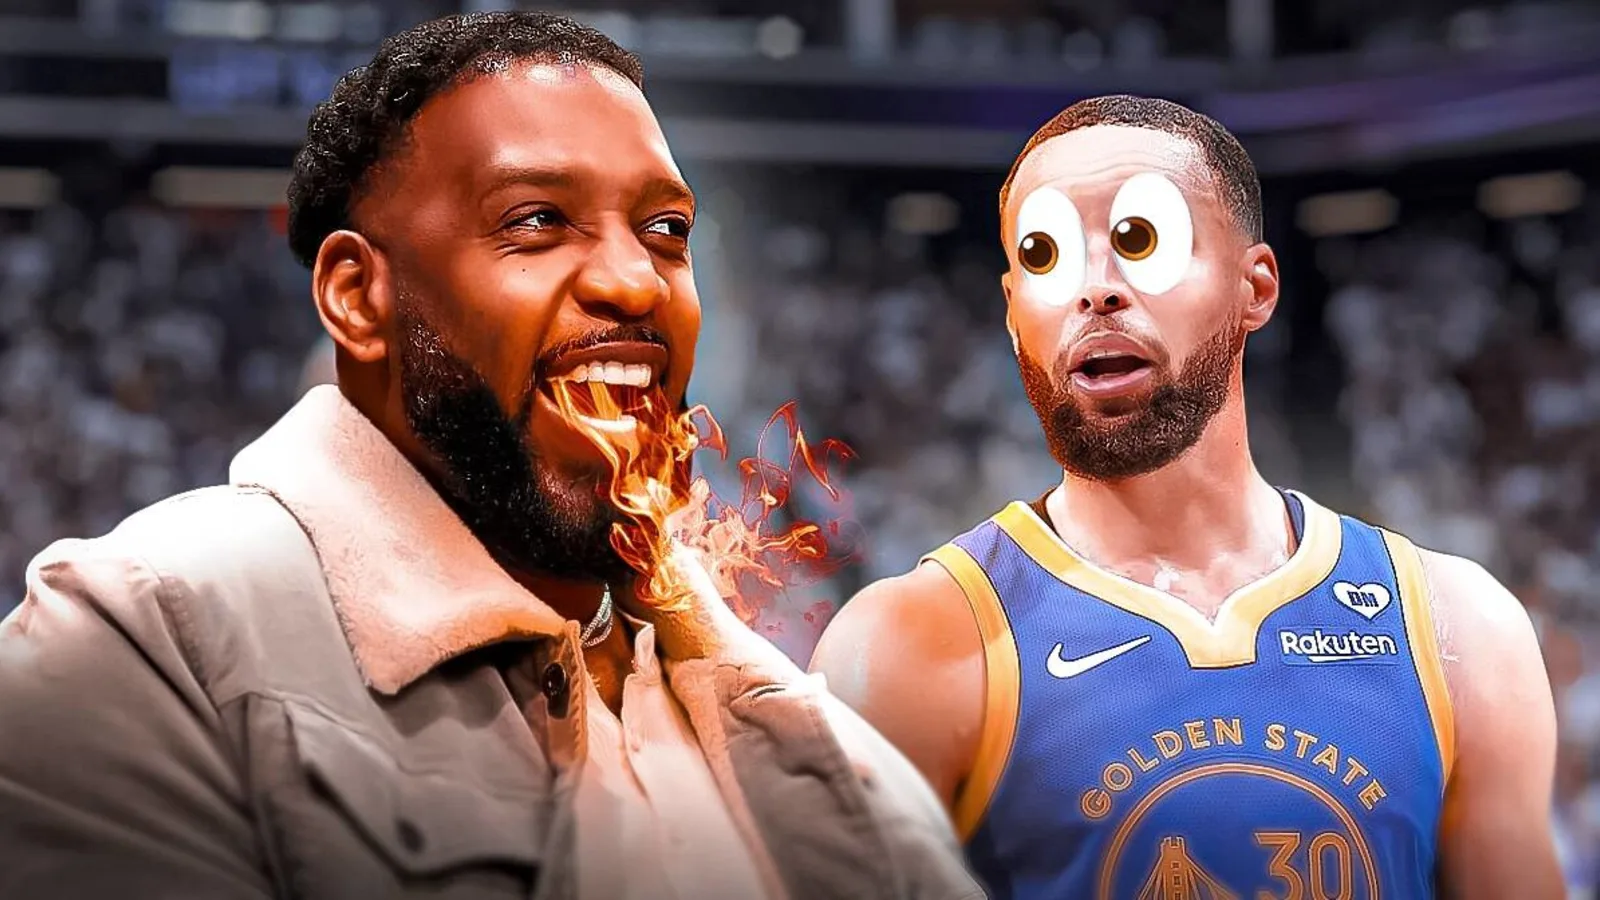 Here’s why Stephen Curry isn’t on Tracy McGrady’s top 5 list